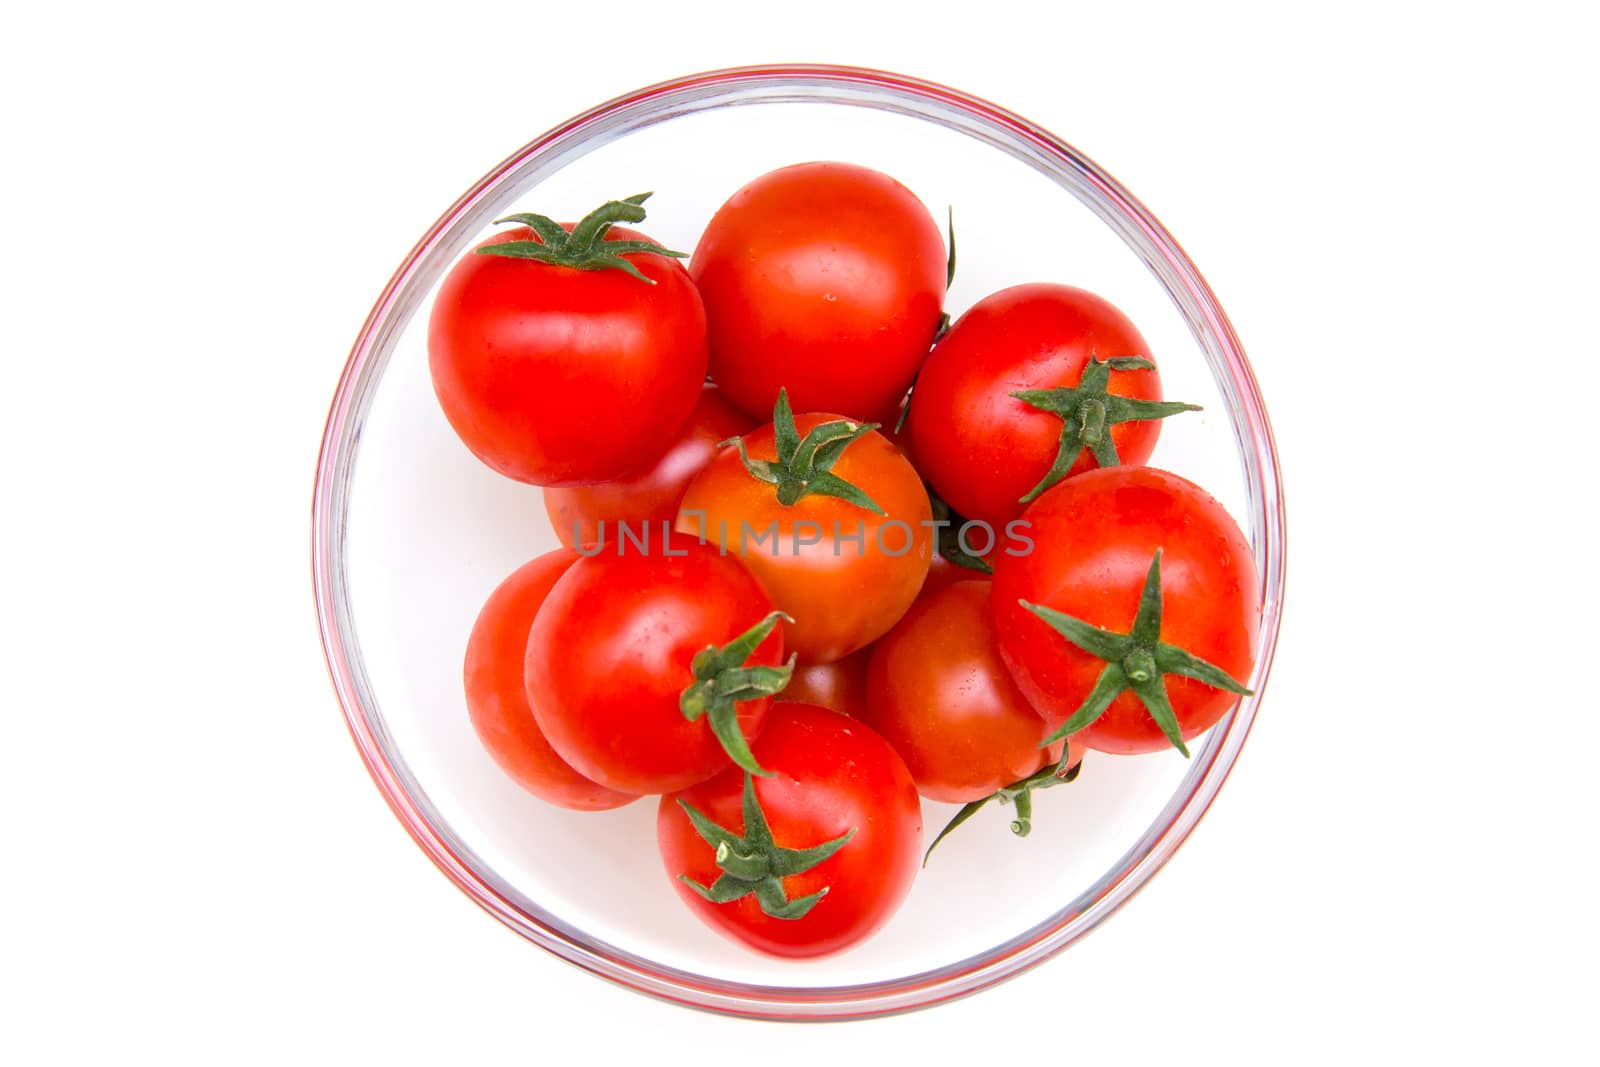 Tomato on bowl on white background seen from above